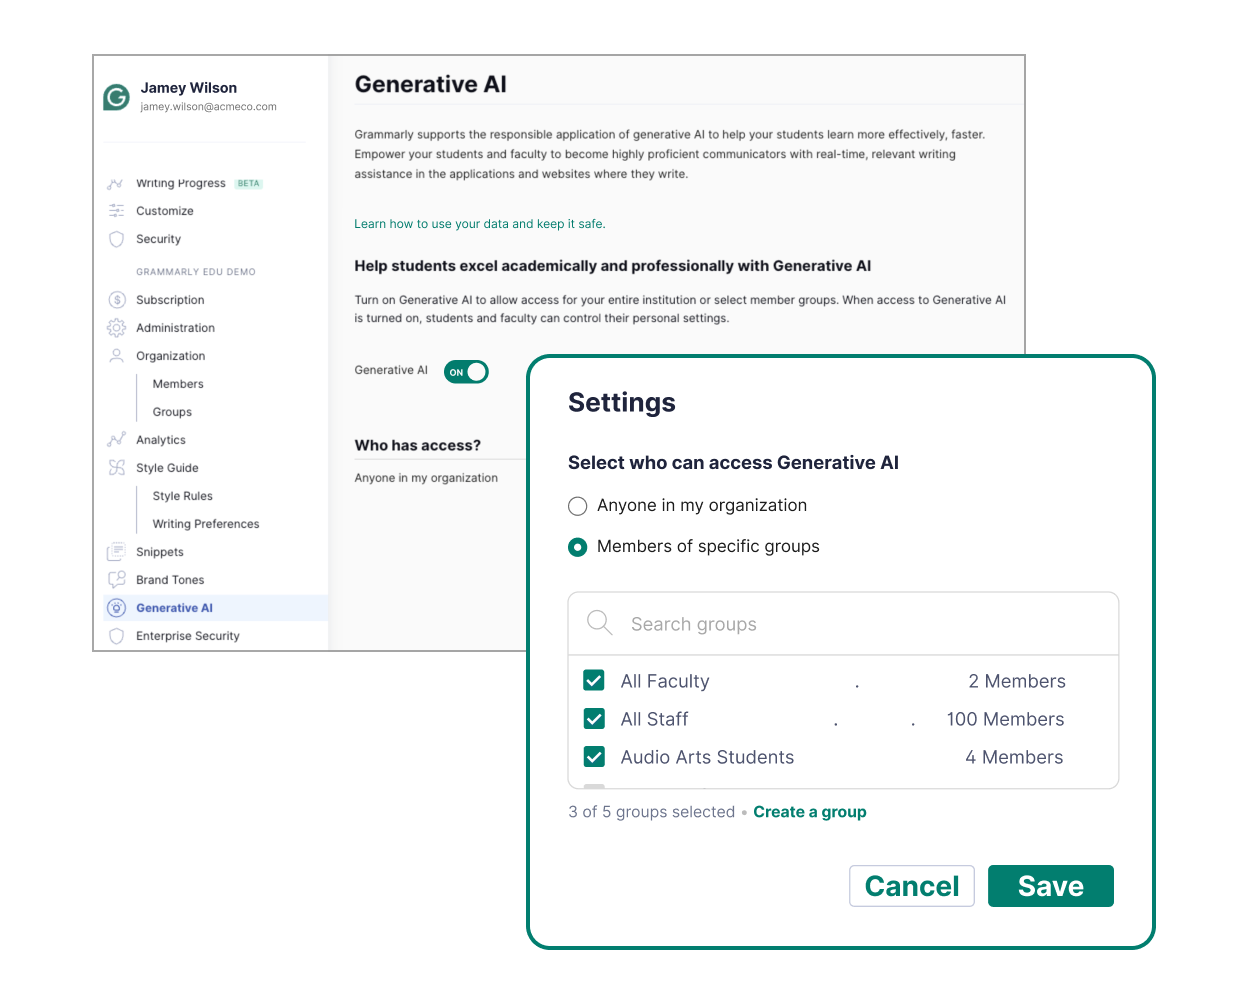 Grammarly generative AI settings for institutions